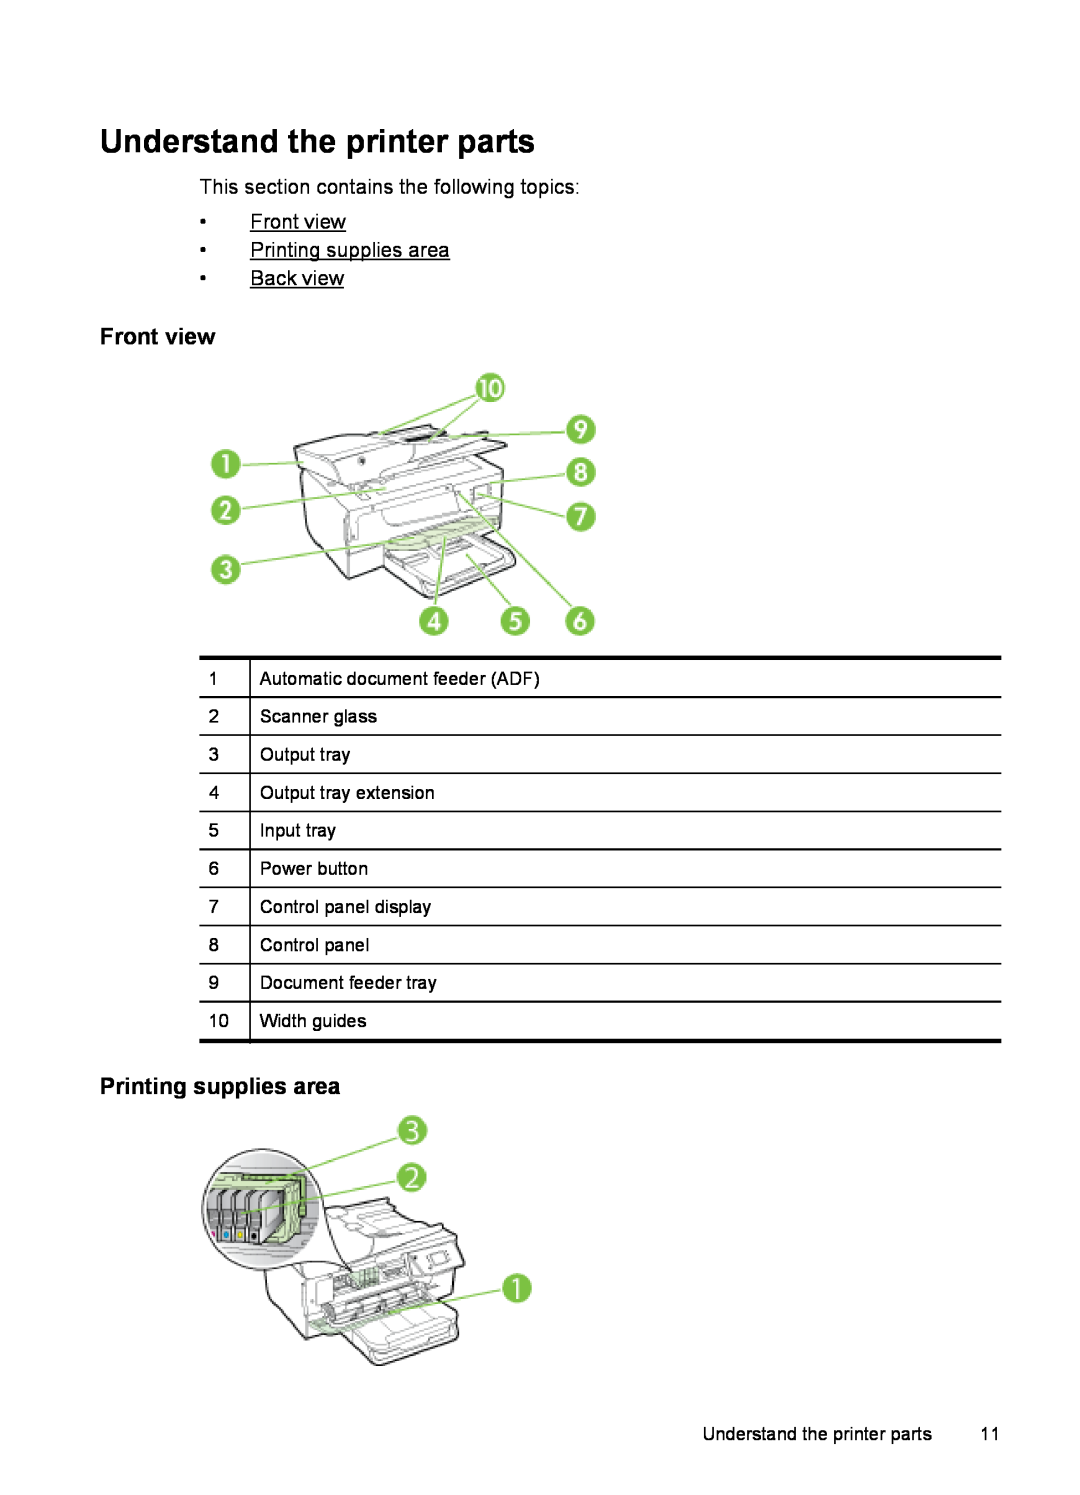 HP 6600 - H7 manual Understand the printer parts, Front view, Printing supplies area 